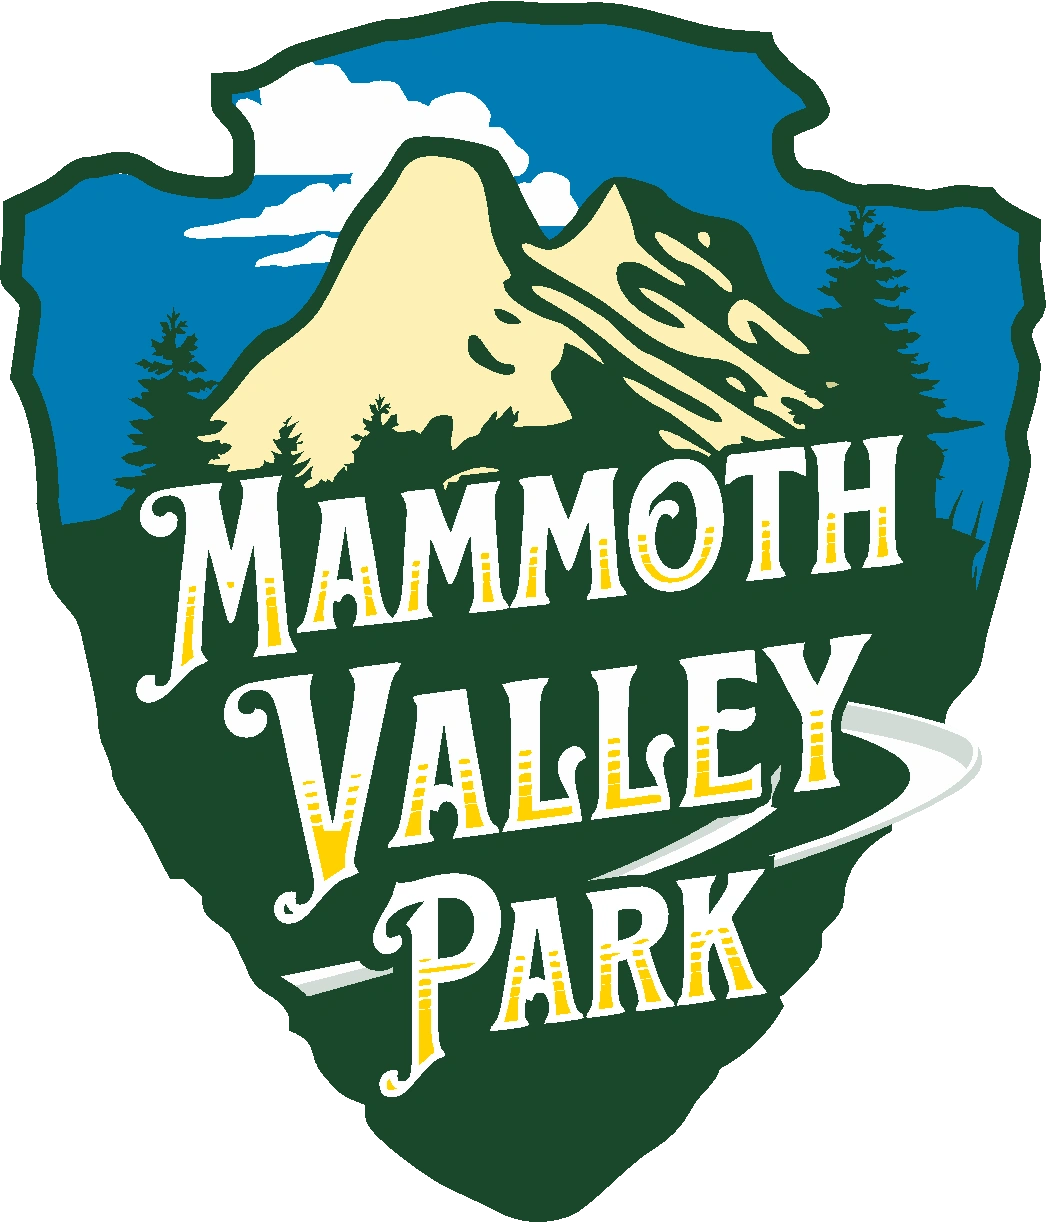 Mammoth Valley Park pic photo